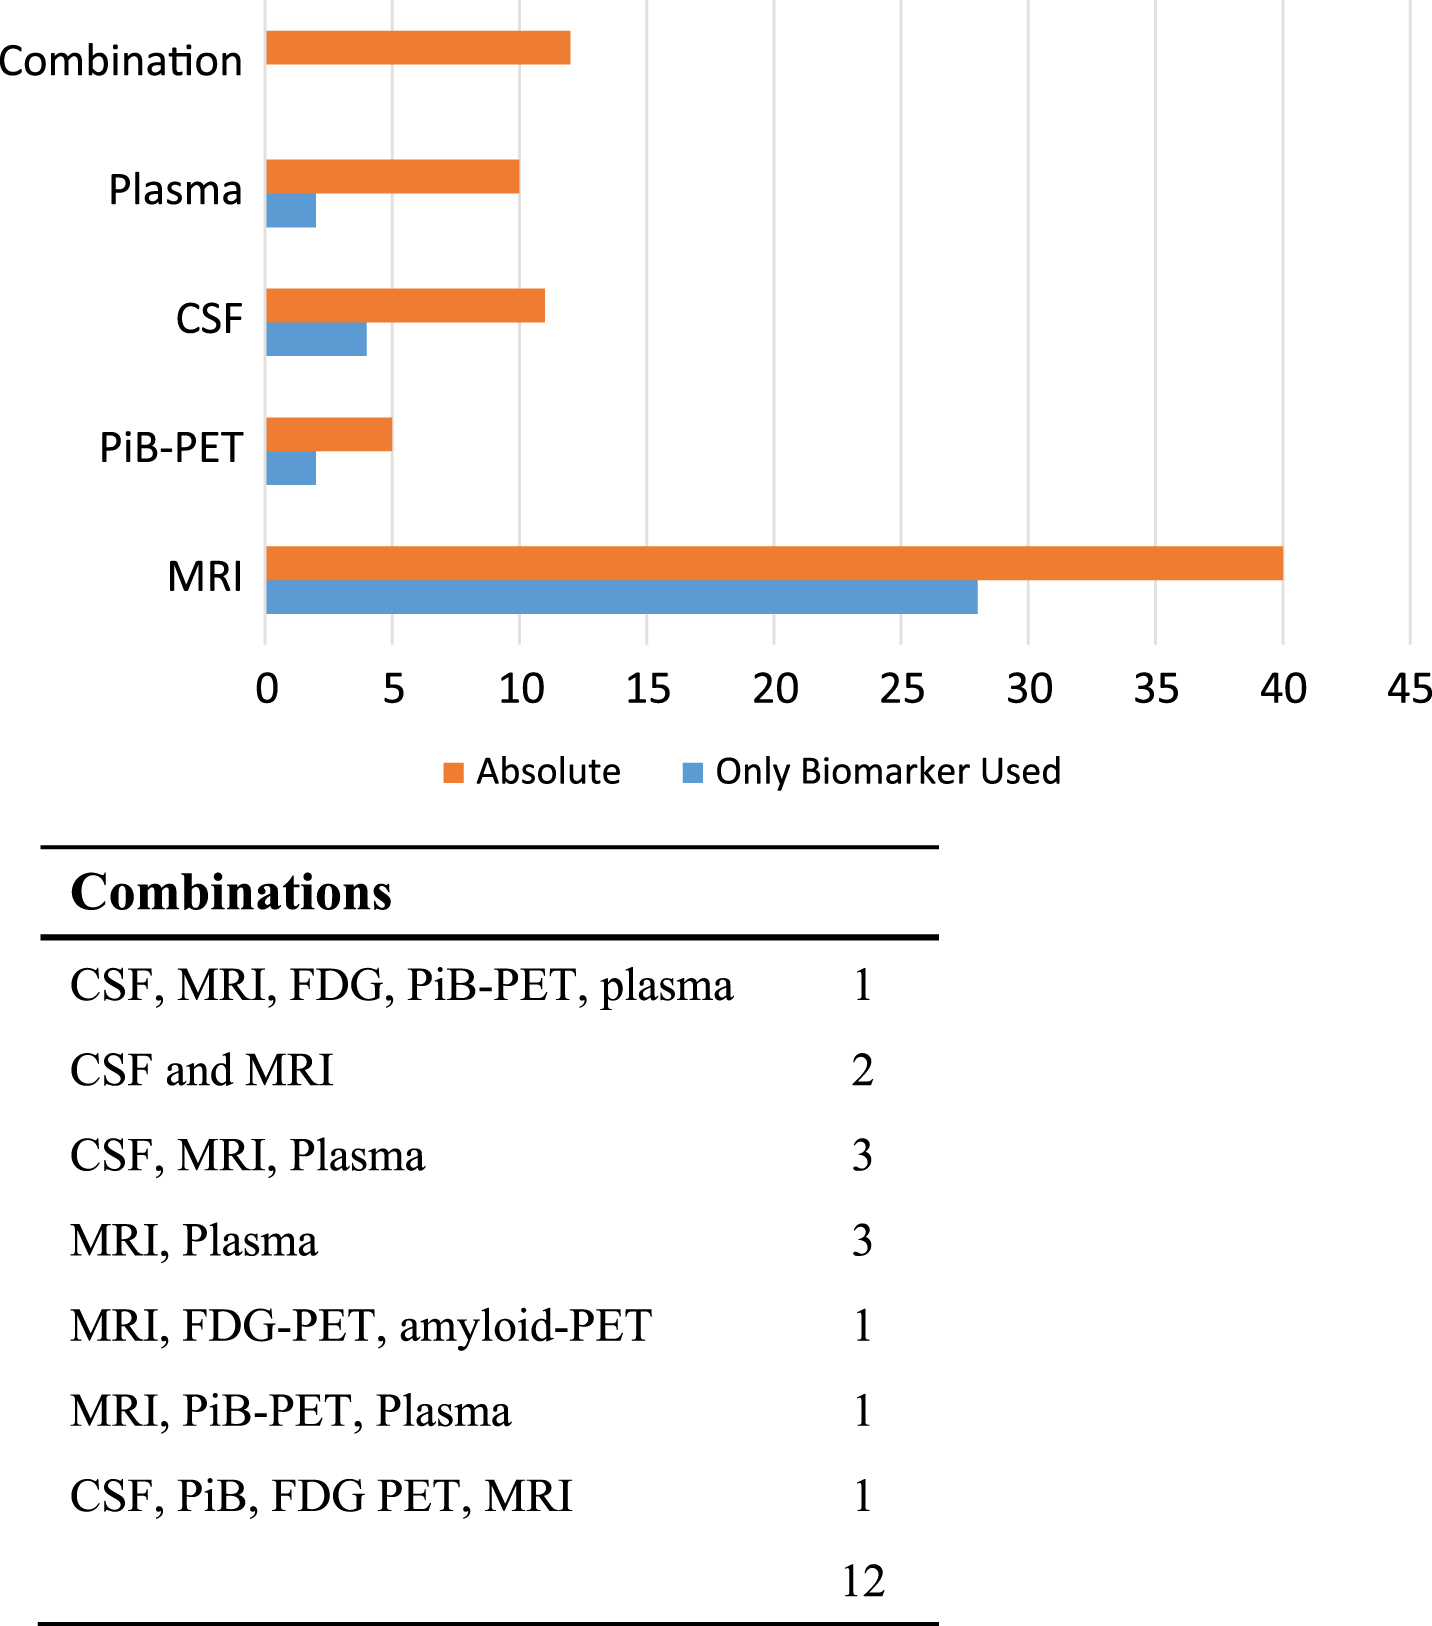 Biomarkers measured. Number of studies measuring each biomarker. The table presents the number of studies that measured a combination of biomarkers.